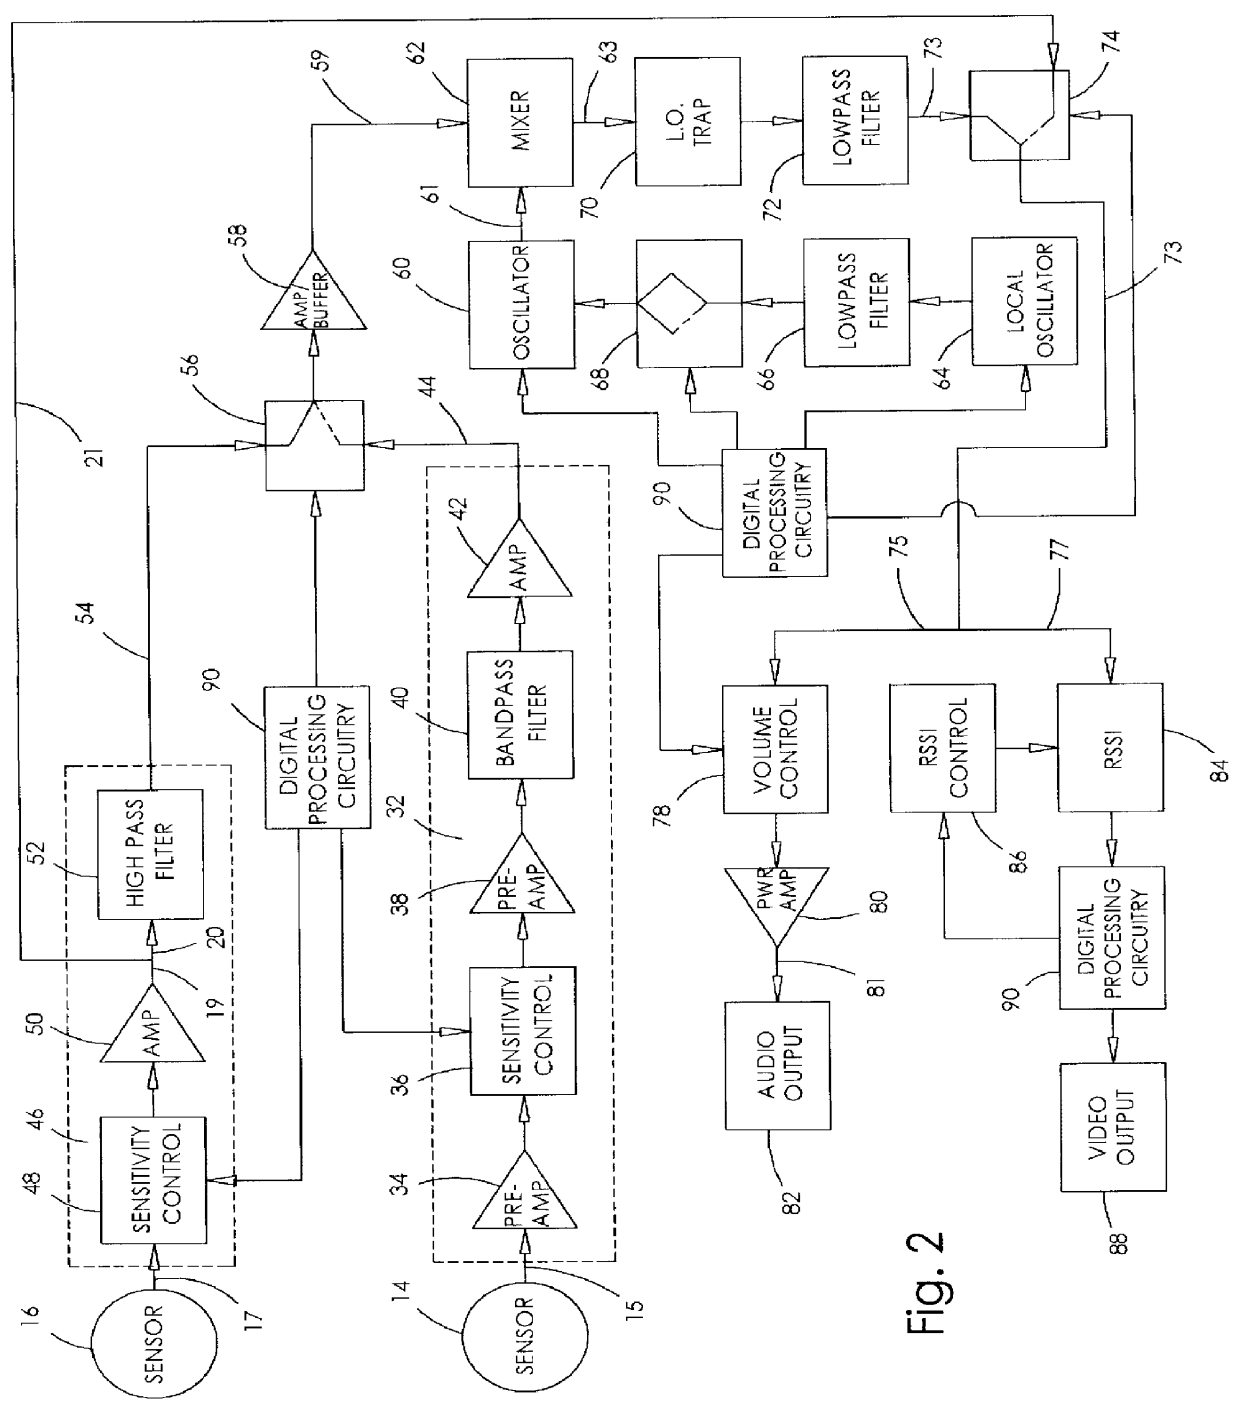 Signal detector and method for detecting signals having selected frequency characteristics